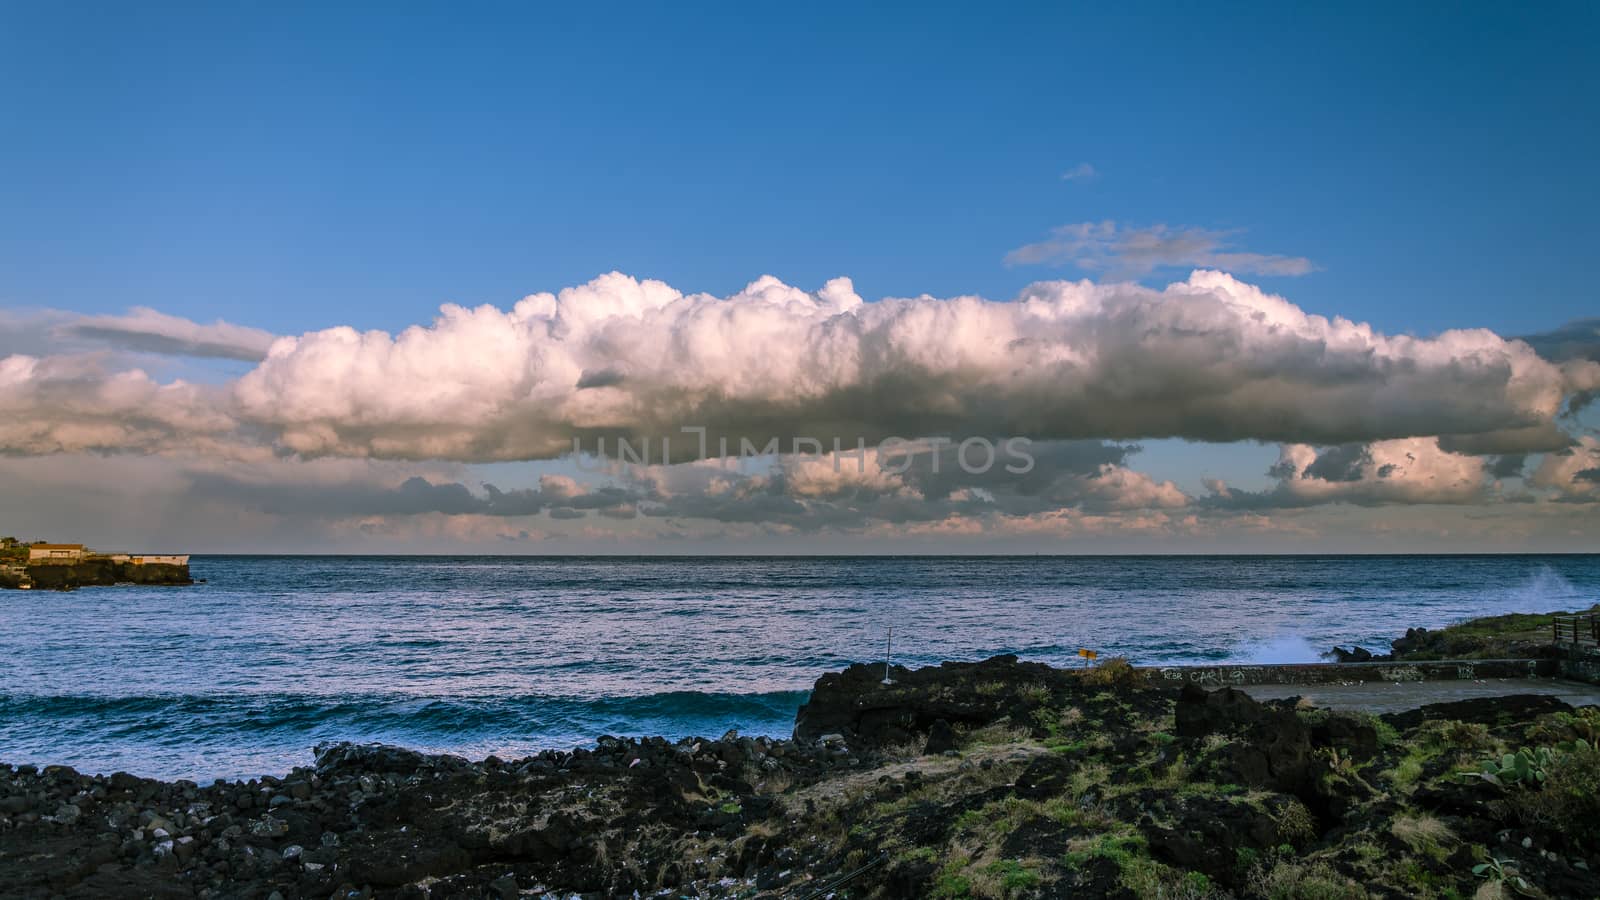 Cloud and sea in winter by alanstix64